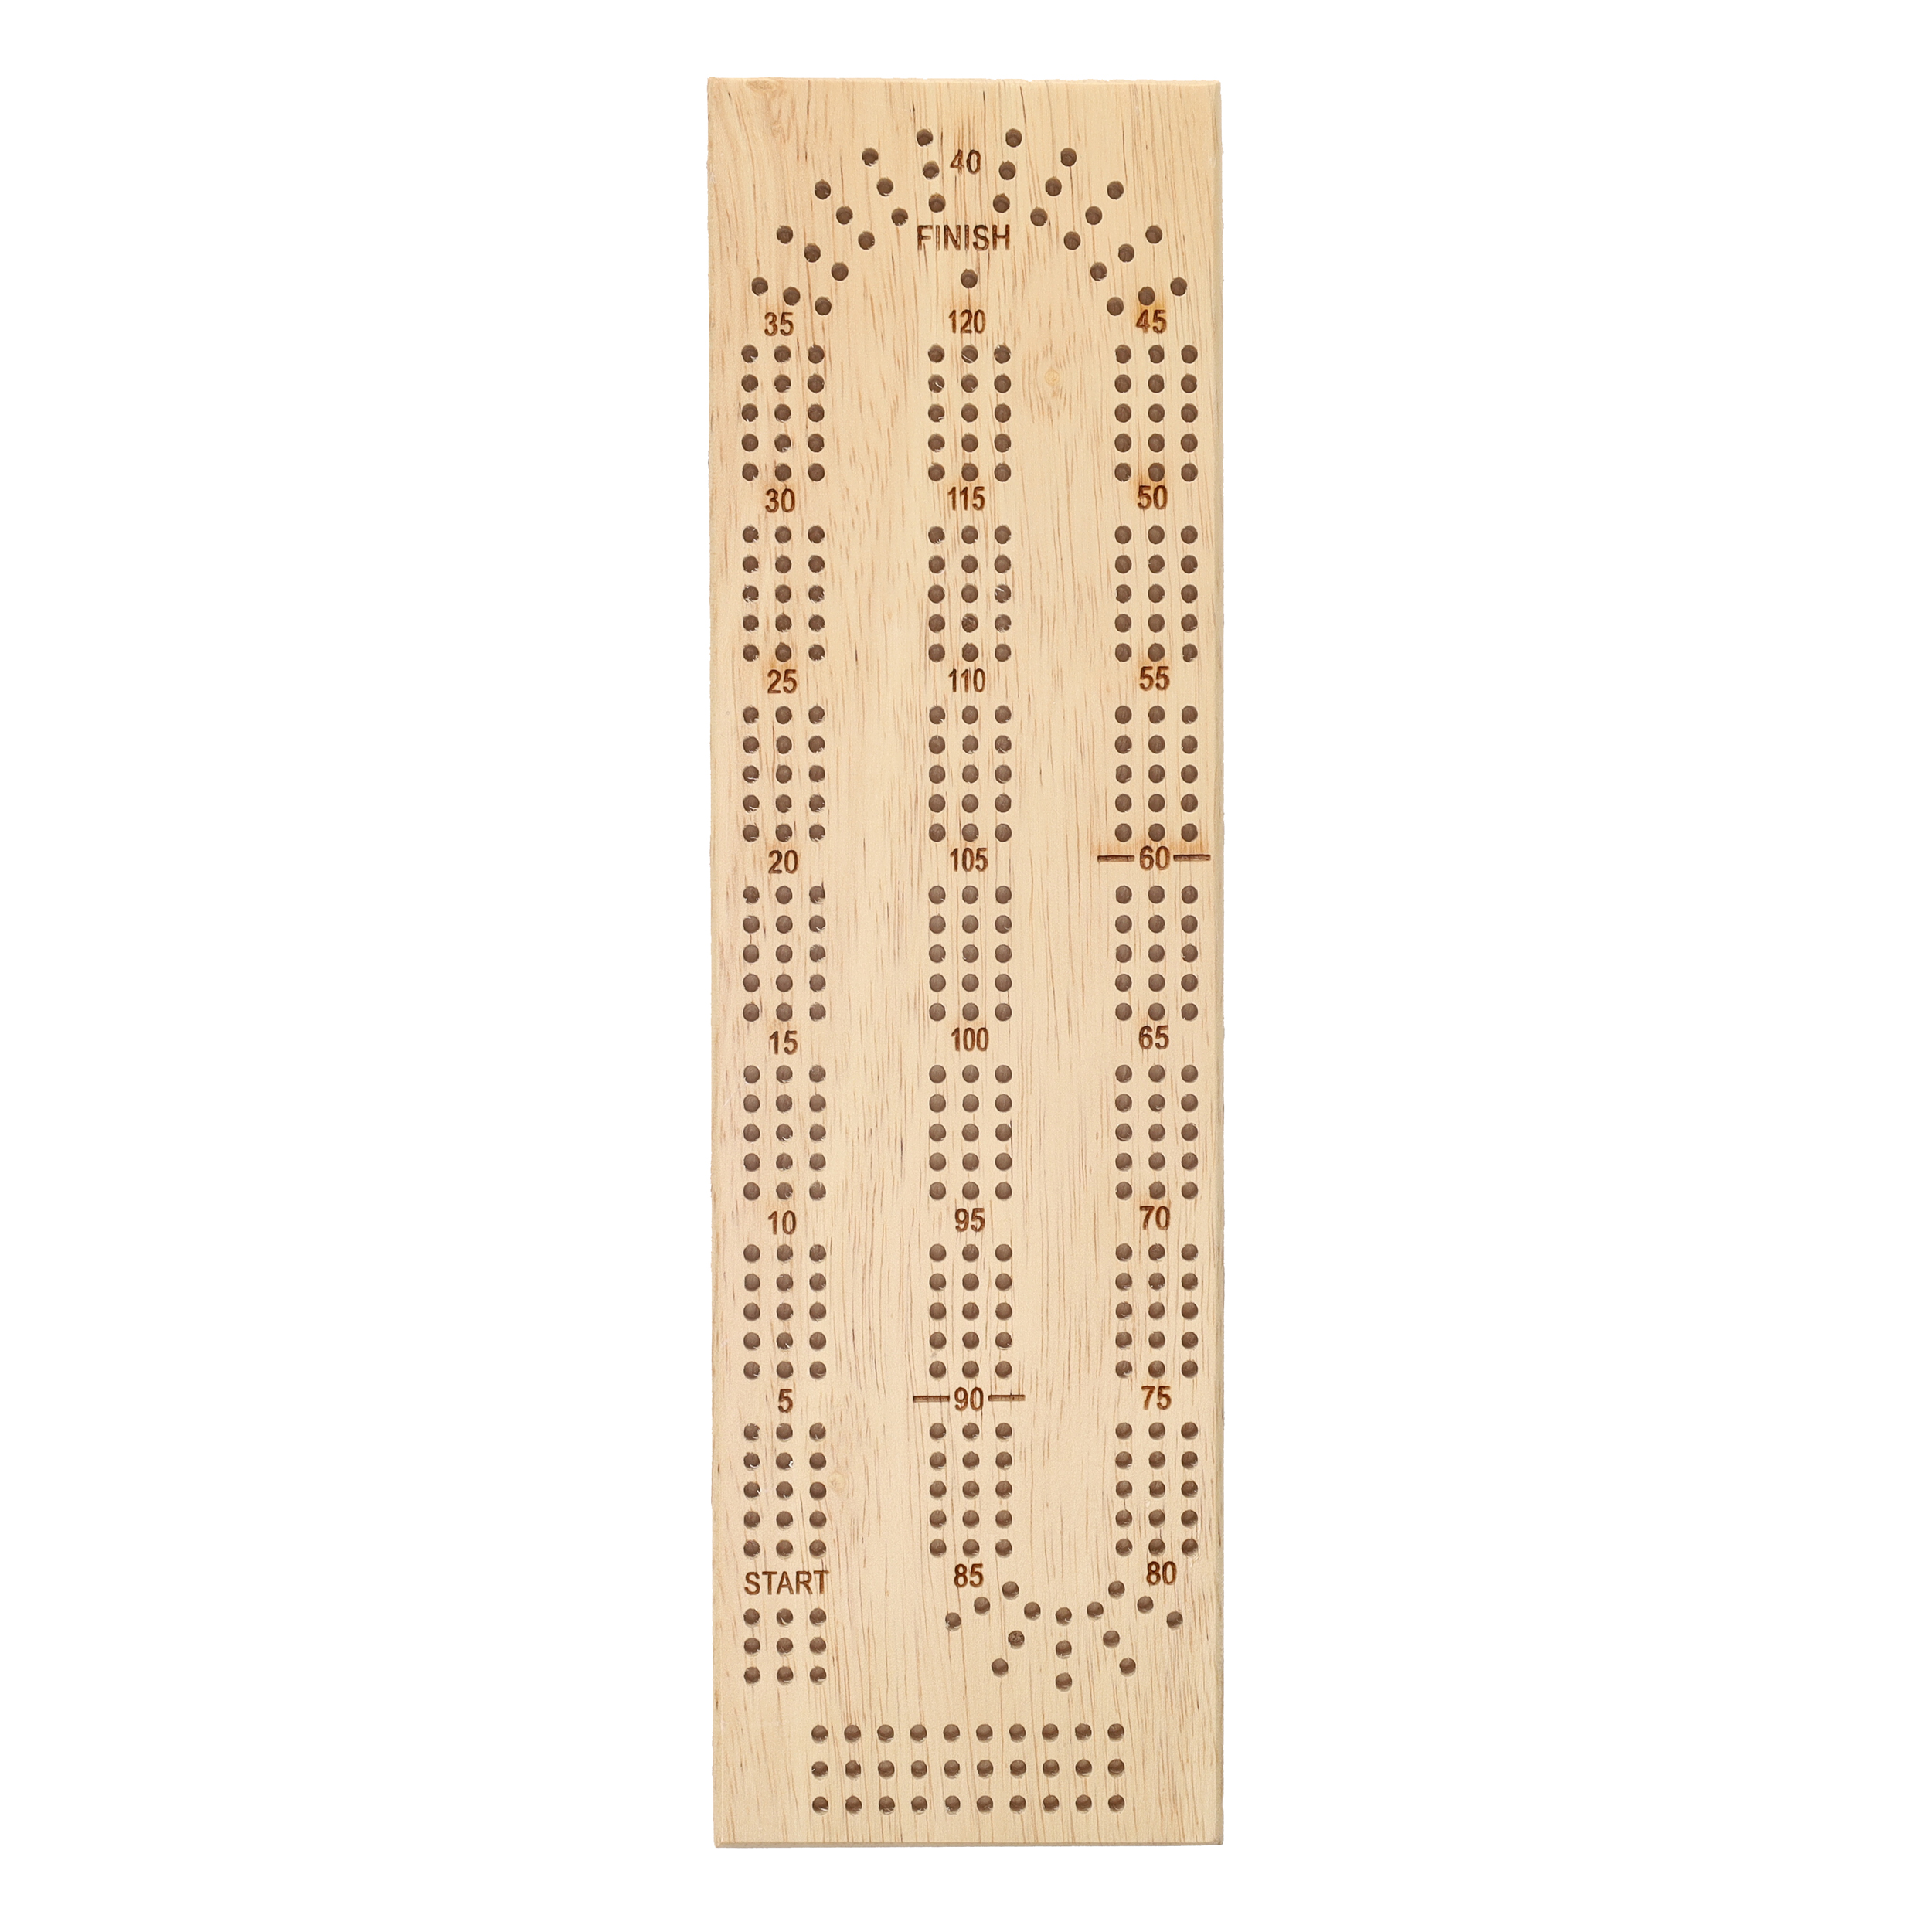  WE Games Wooden Cribbage Board Game Set with Storage, Solid  Wood Continuous 3 Track for 2-3 Players, Includes 9 Metal Pegs & Deck of  Cards, Great for Travel, for Adults and